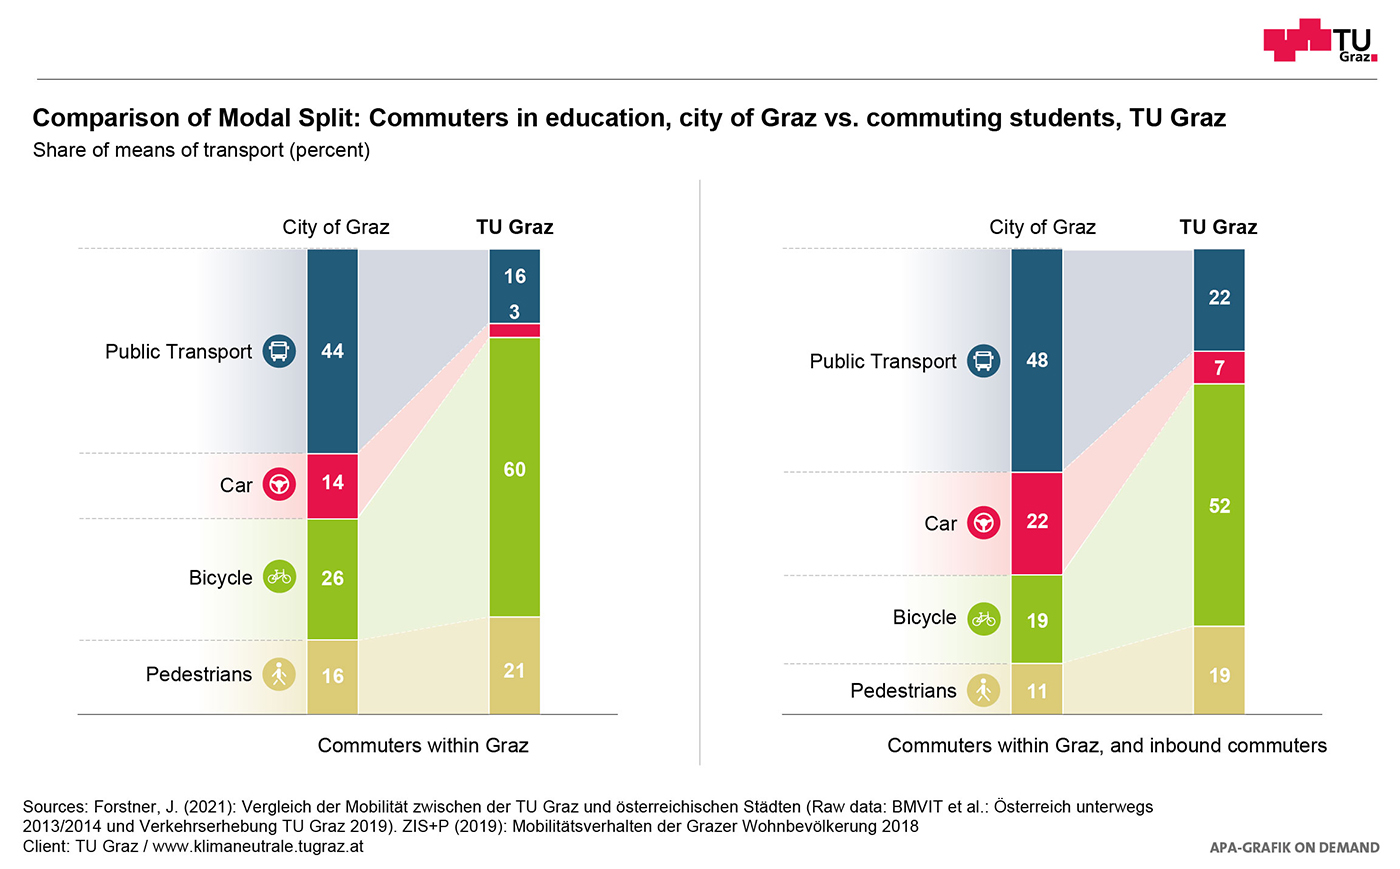 Graphical representation of the modal split of commuters in education, city of Graz vs. communting students, TU Graz.